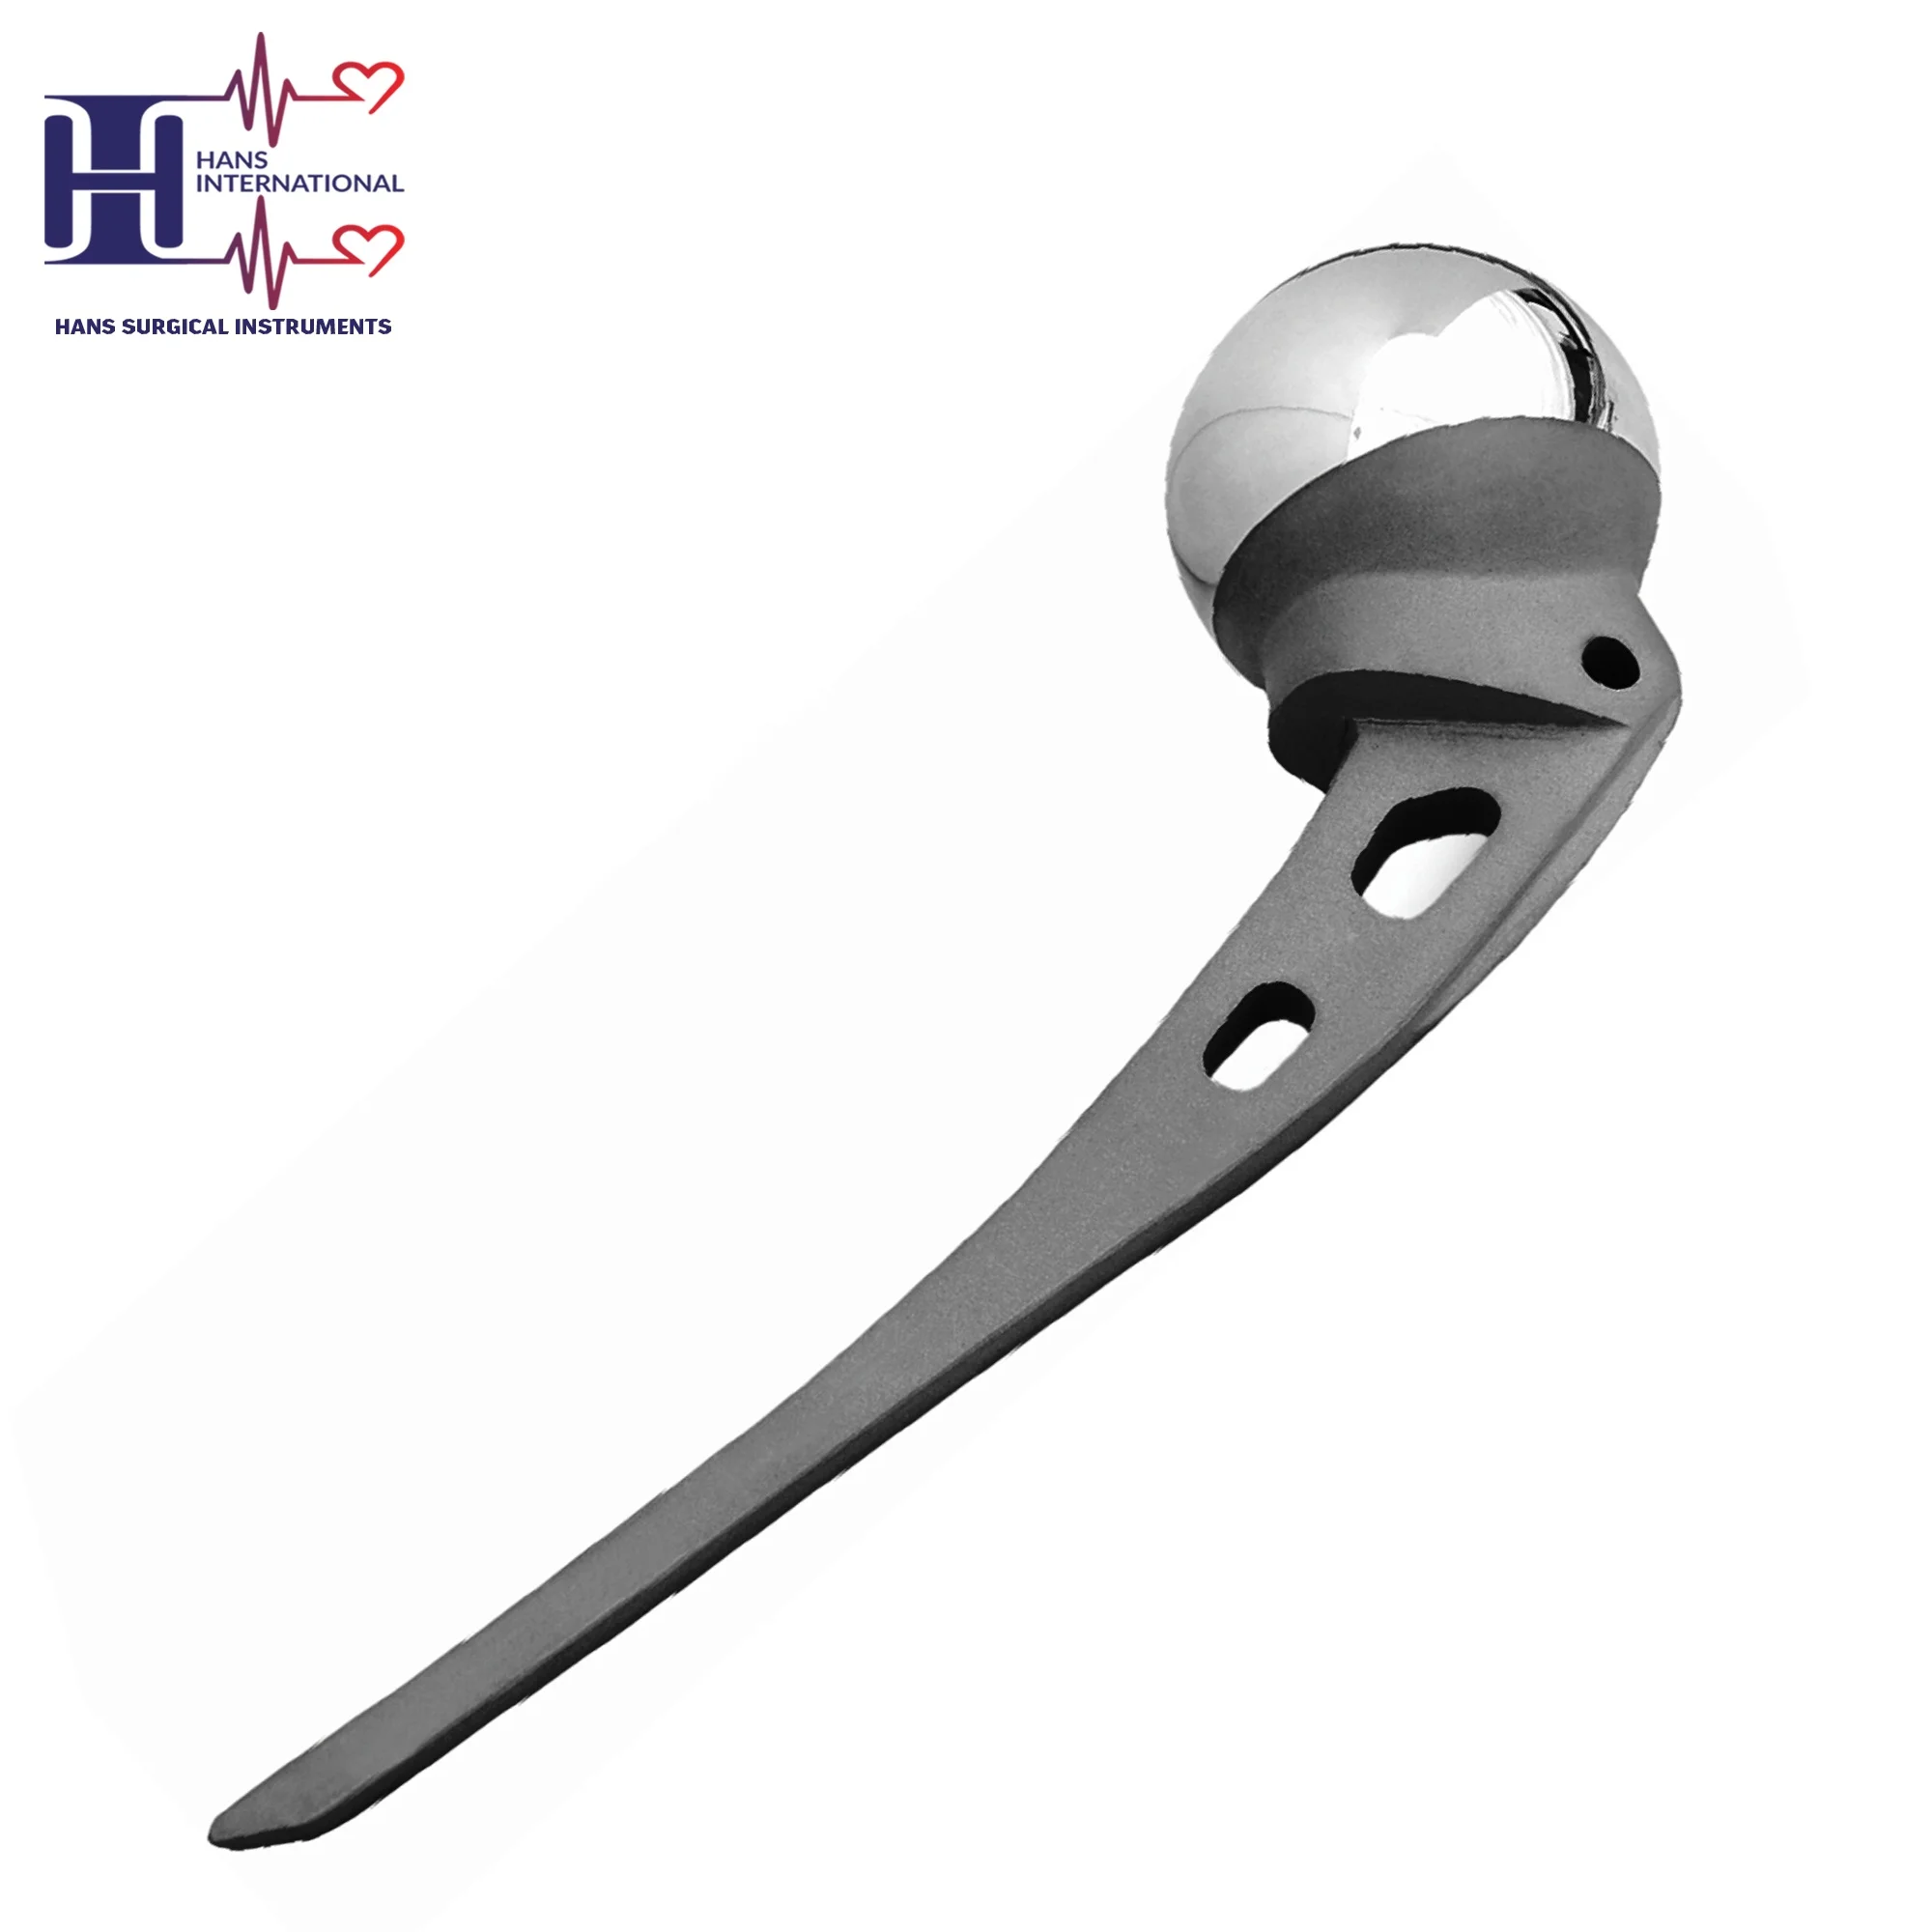 Austin Moore Hip Prosthesis Hip Joint Excel Stainless Steel 316l High Quality Bone Implants Orthopedic Implants Buy Austin Moore Hip Prosthesis Hip Joint Excel High Quality Best Selling Products Hans International